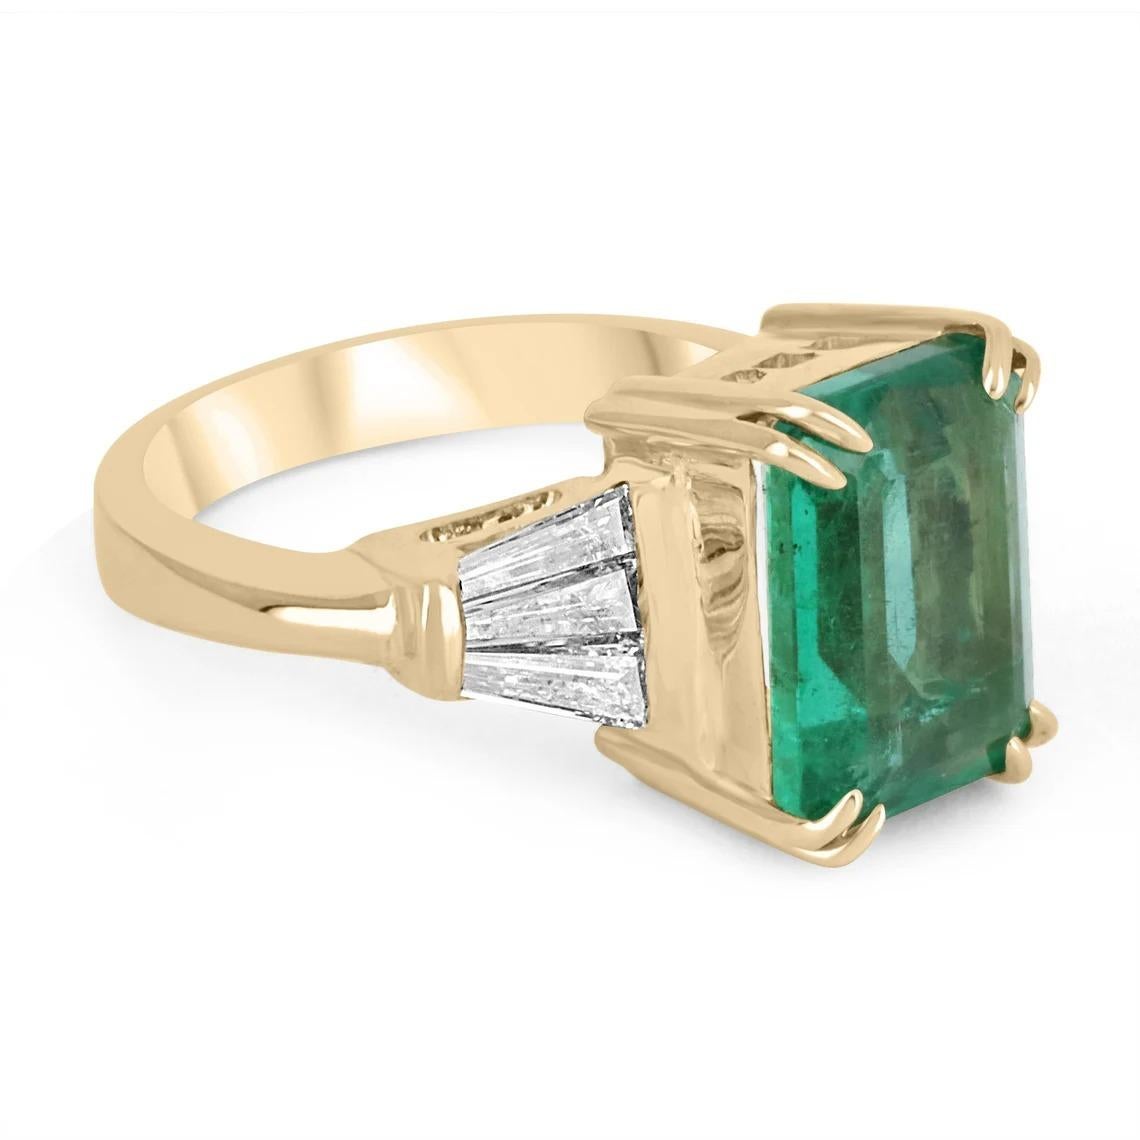 Featured is a magnificent, natural emerald and diamond ring. In the very center is a gorgeous, 3.86-carat emerald-emerald cut; displaying a stunning, medium-dark green color, and excellent luster. Accented on the sides, are six tapered baguette